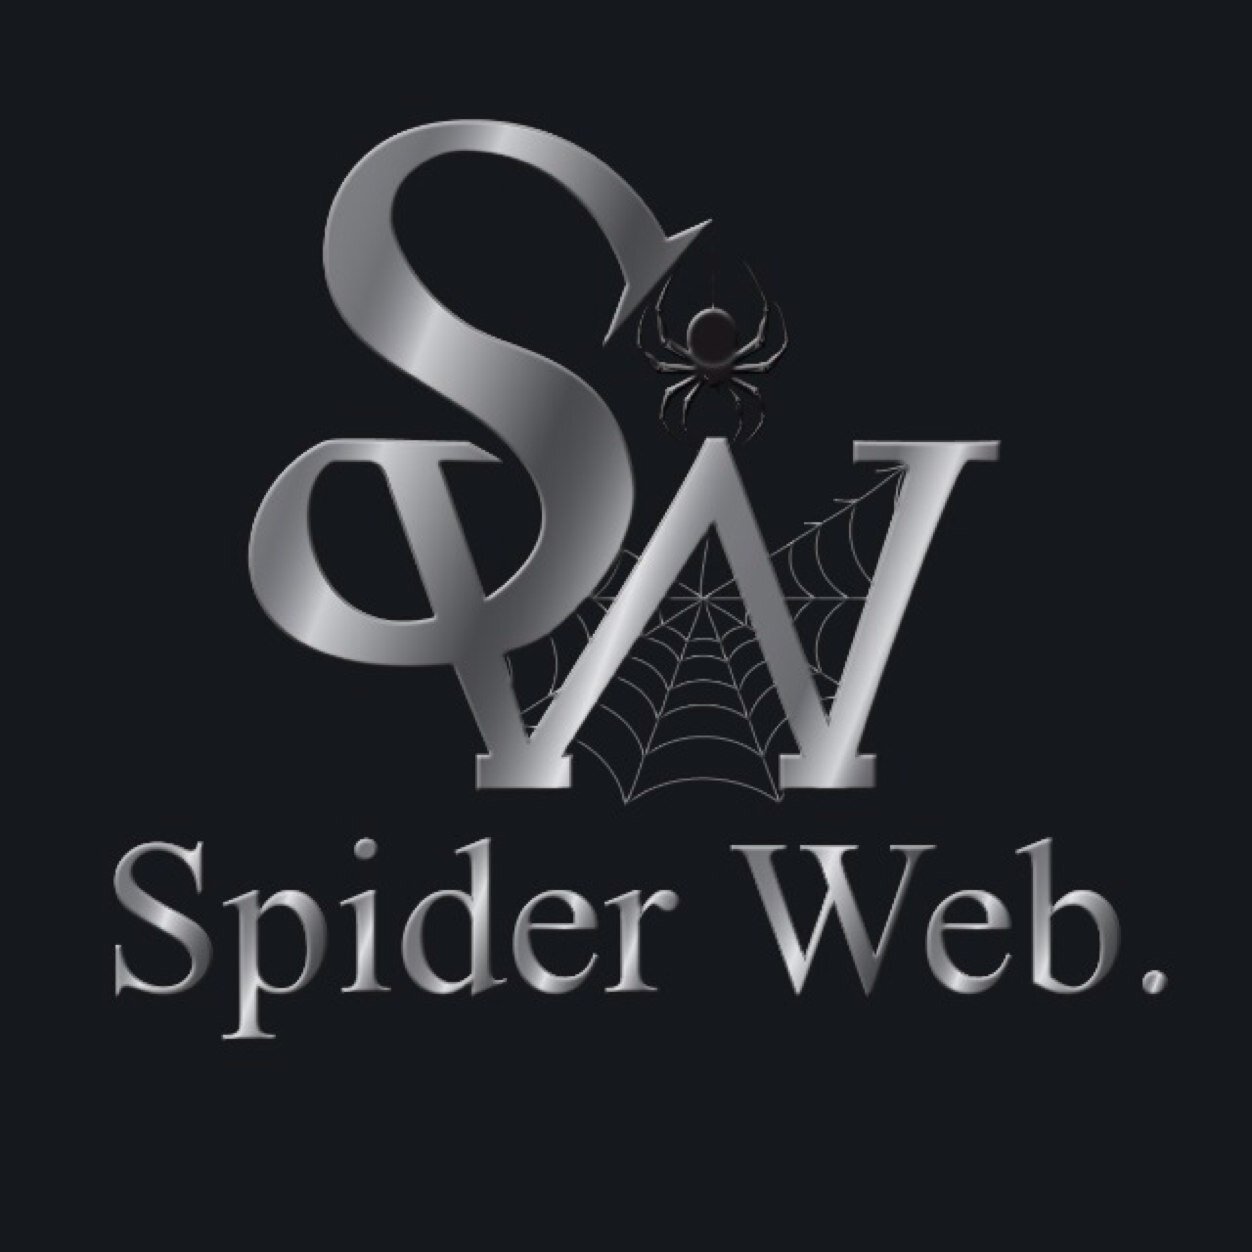 Spider Web is a multimedia company that provides, Web Design, Logo design, printing, editing, Film Priduction and more. Visit our site today.